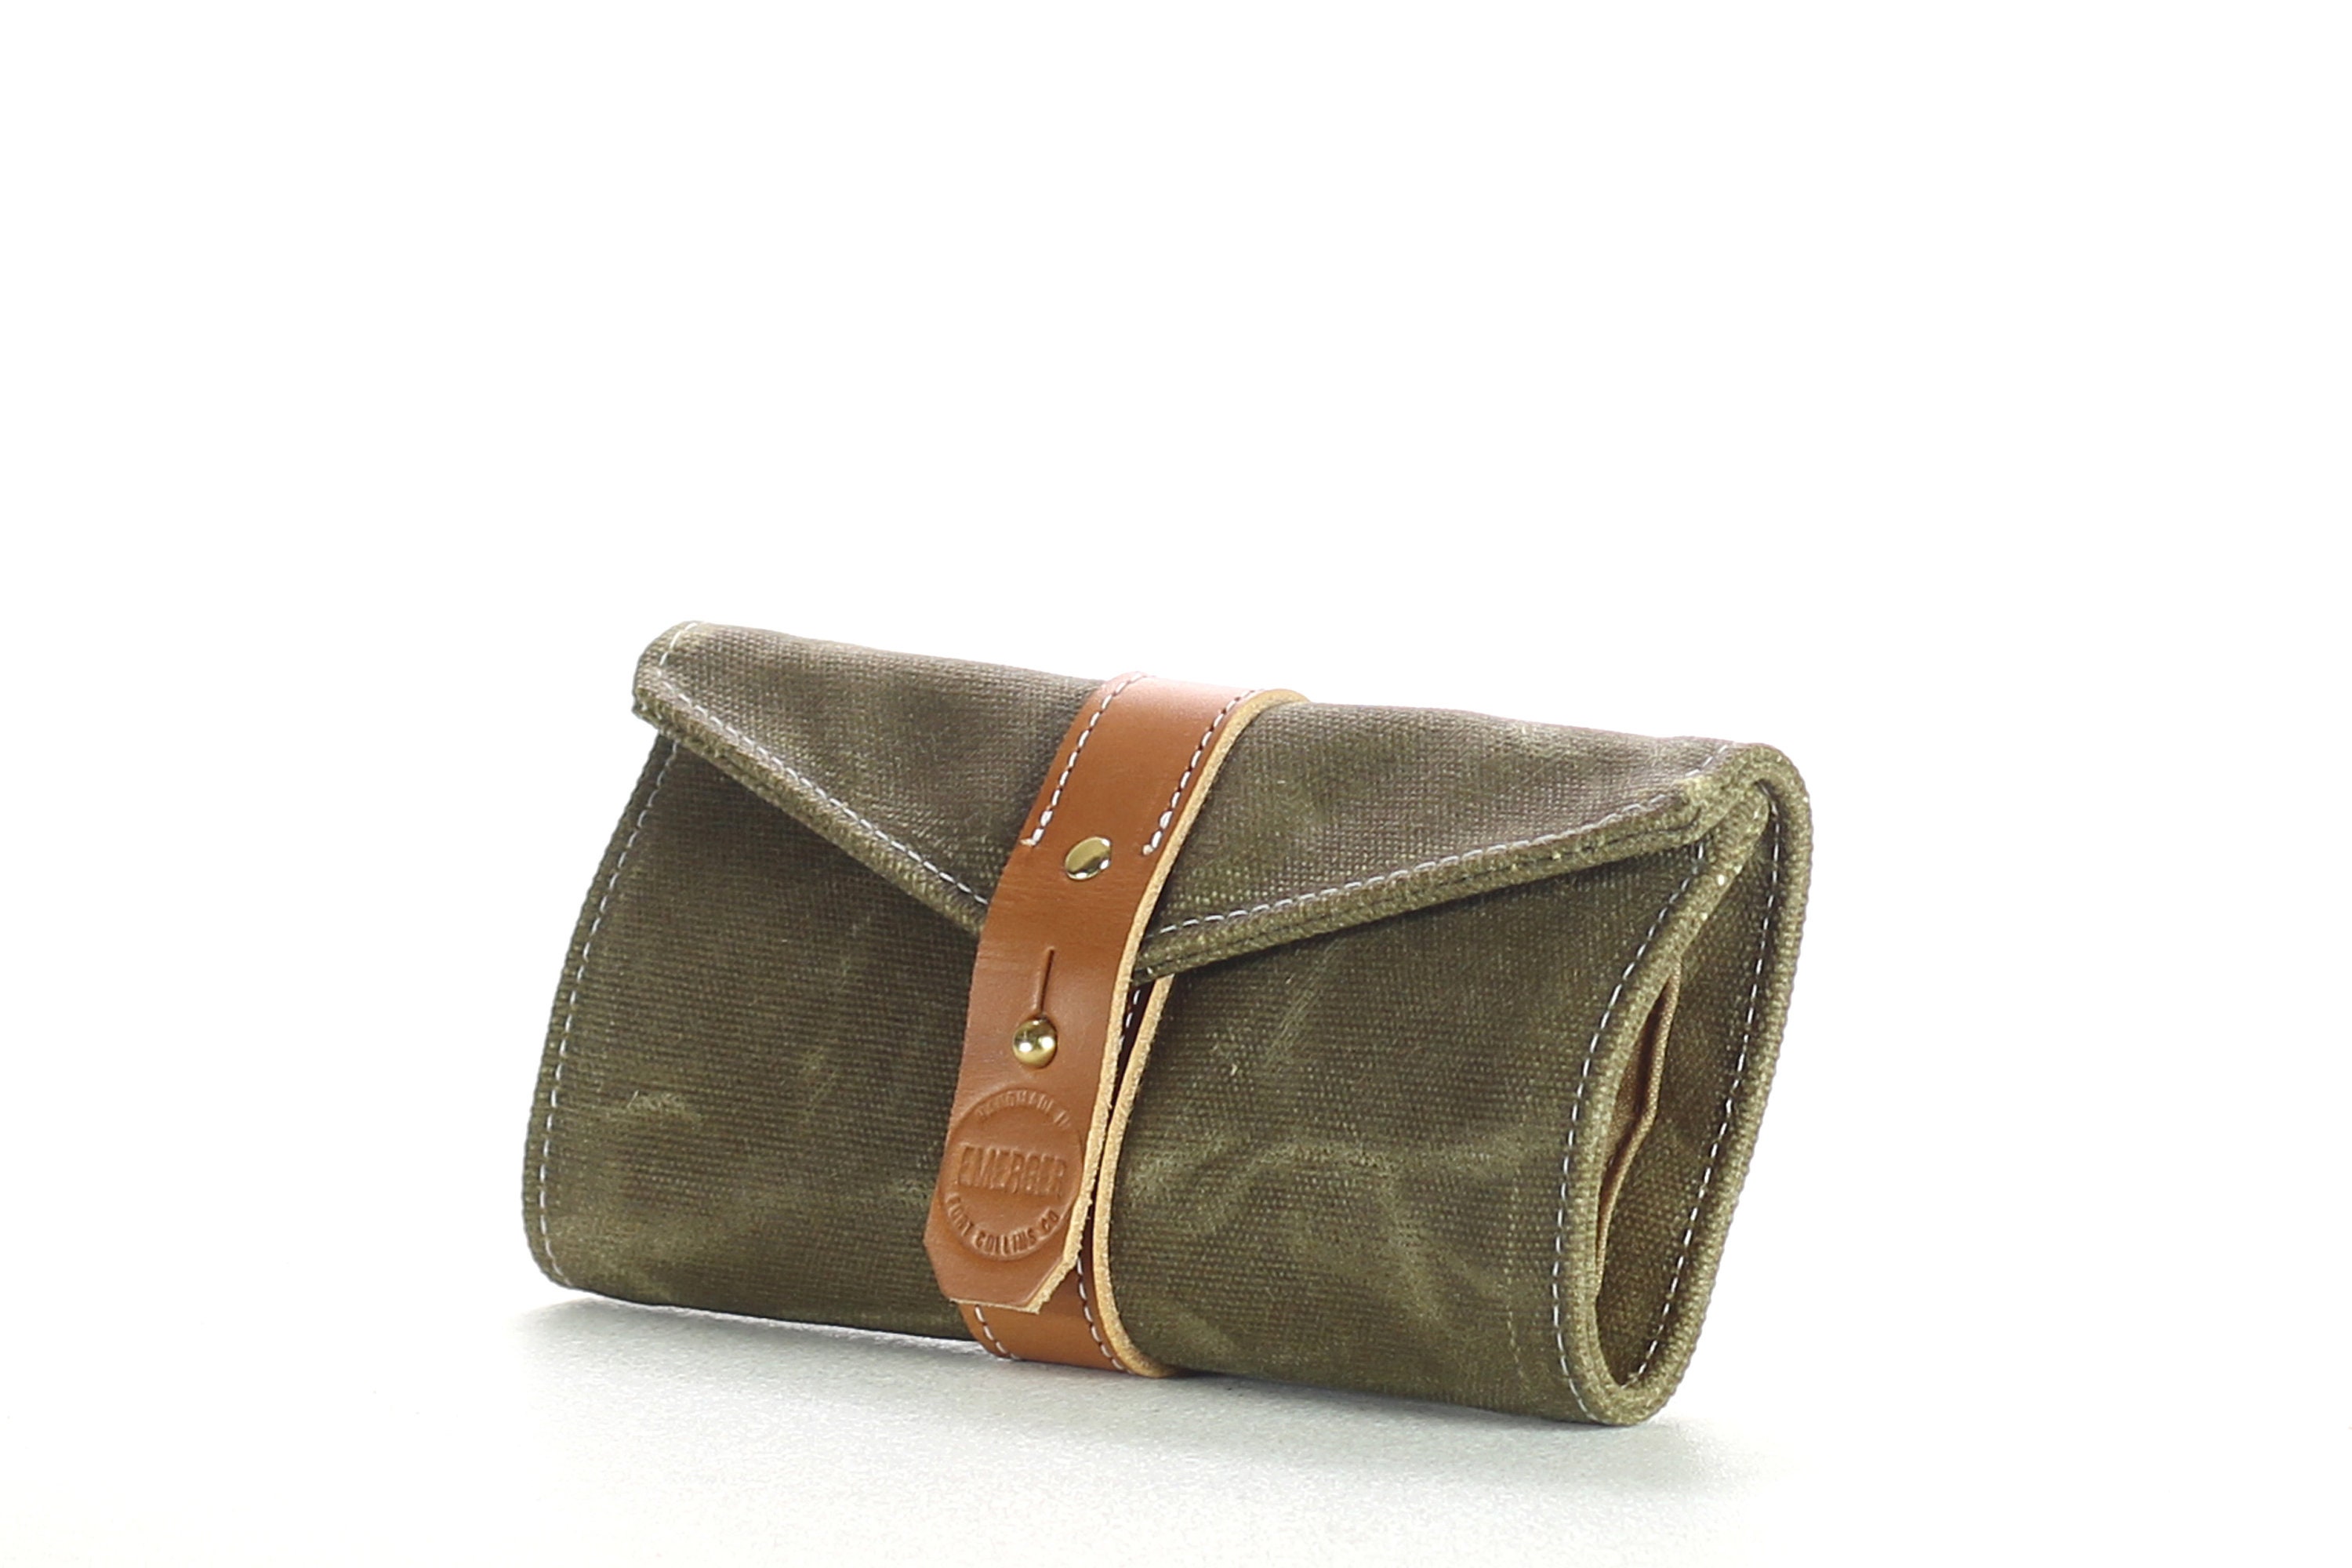 Waxed Canvas, Leather and Shearling Fly Fishing Hybrid Streamer and Leader Wallet